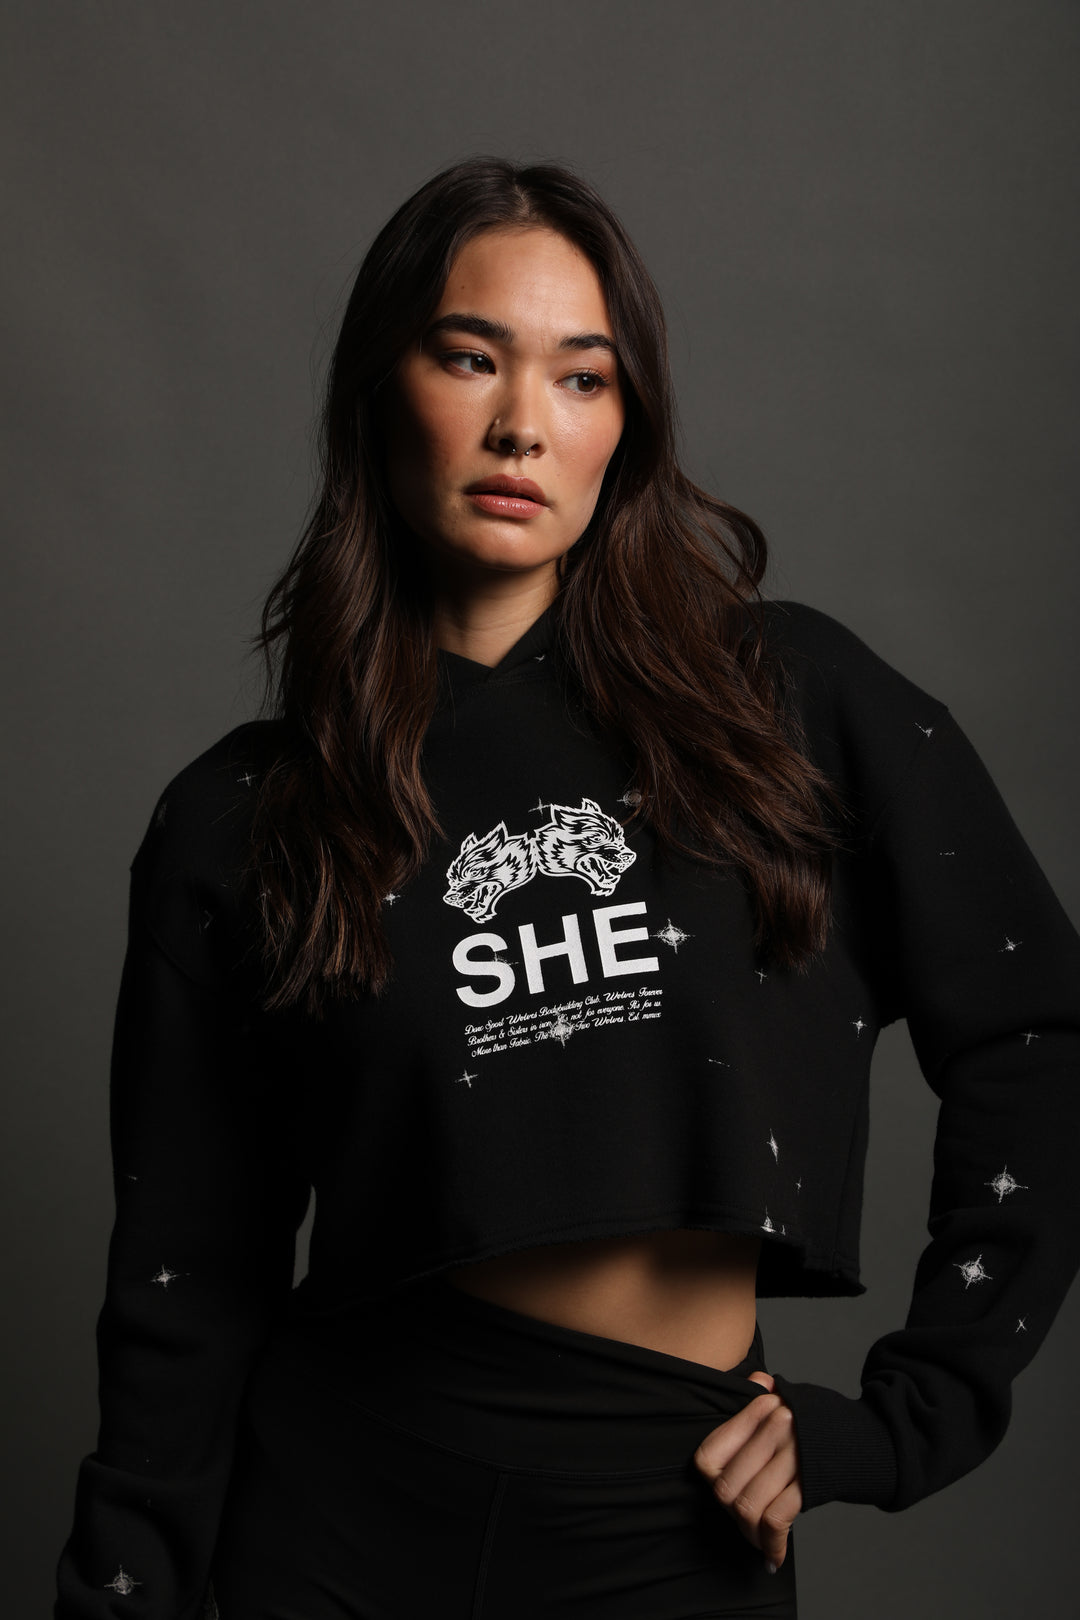 She's Gritty "Pierce" (Cropped) Hoodie in Black/White Starry Night